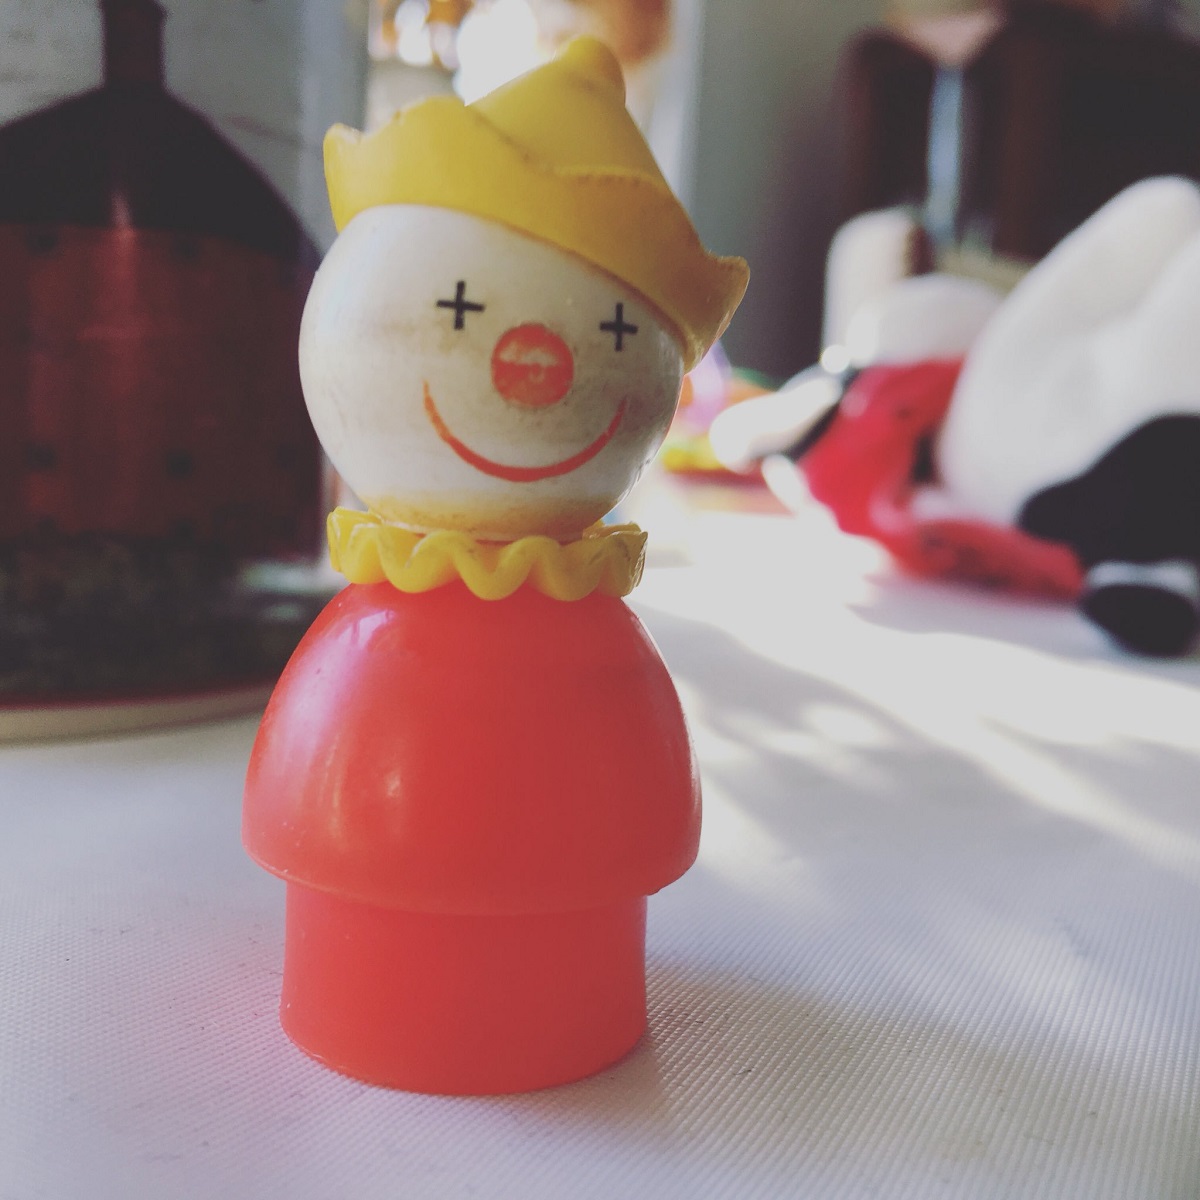 Fisher Price clown figure with Xs on its eyes